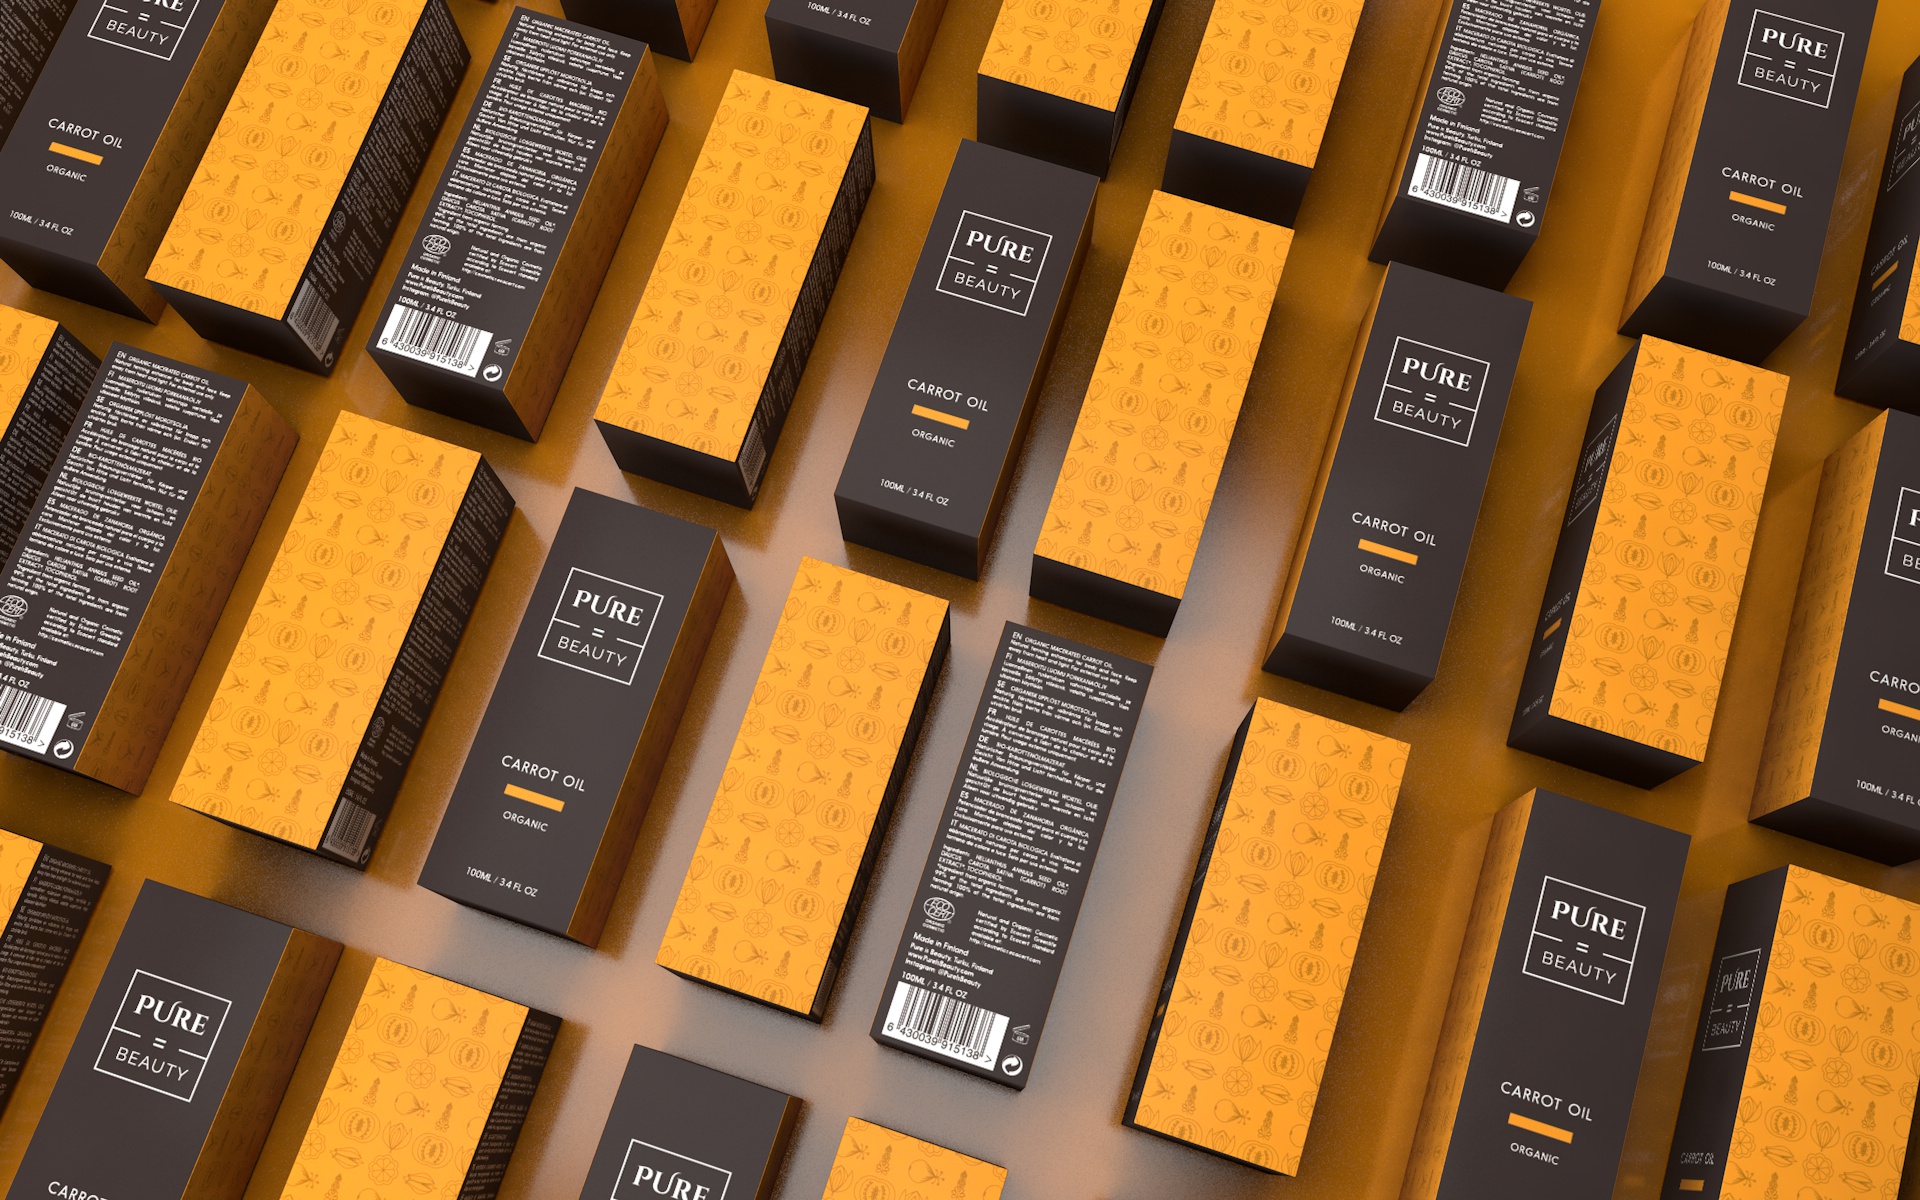 graphic-design-packaging-label-branding-brand-design-cosmetics-healthcare-logo-pure-beauty-cosmetic-outer-carton-design-brand-strategy-art-direction-pictoo